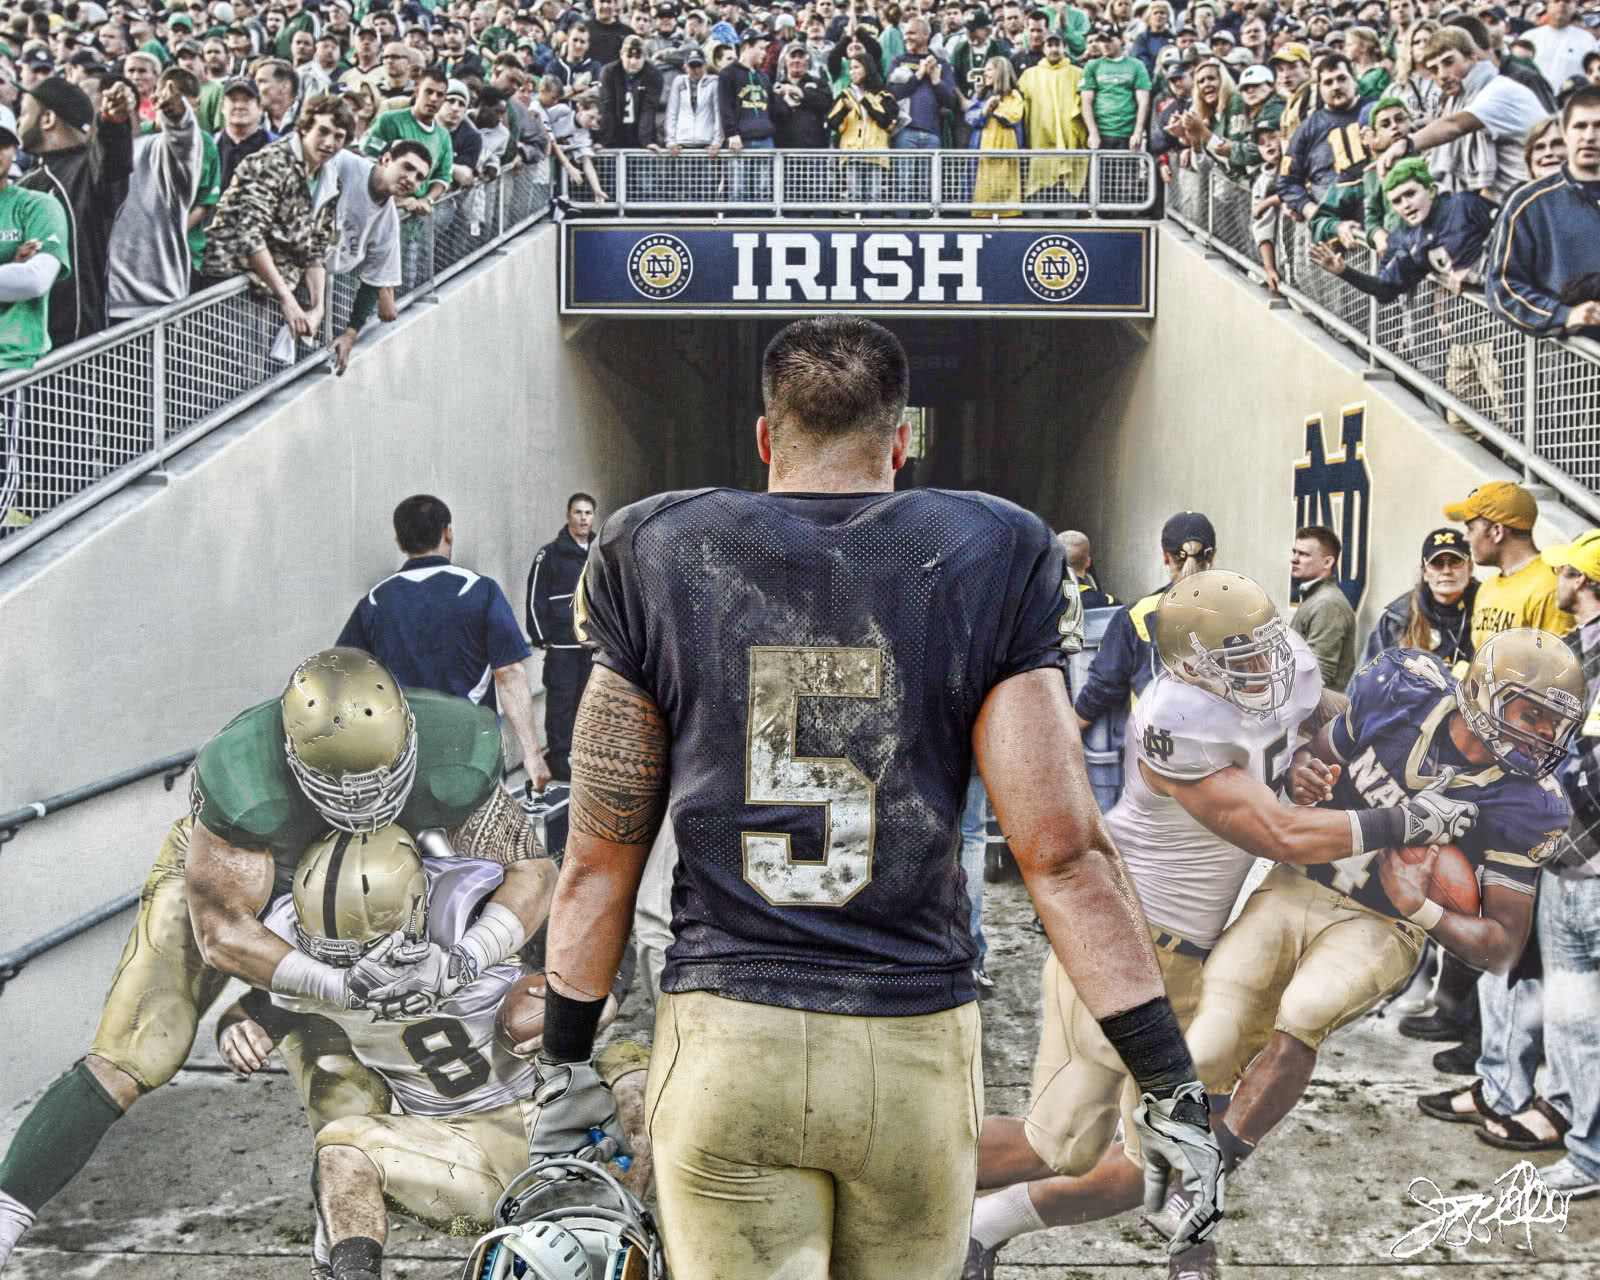 Notre Dame Fighting Irish Logo Wallpaper for Android Mobile Phone  HD  Wallpapers  Wallpapers Download  High Resolution Wallpapers  Notre dame  wallpaper Fighting irish logo Notre dame fighting irish